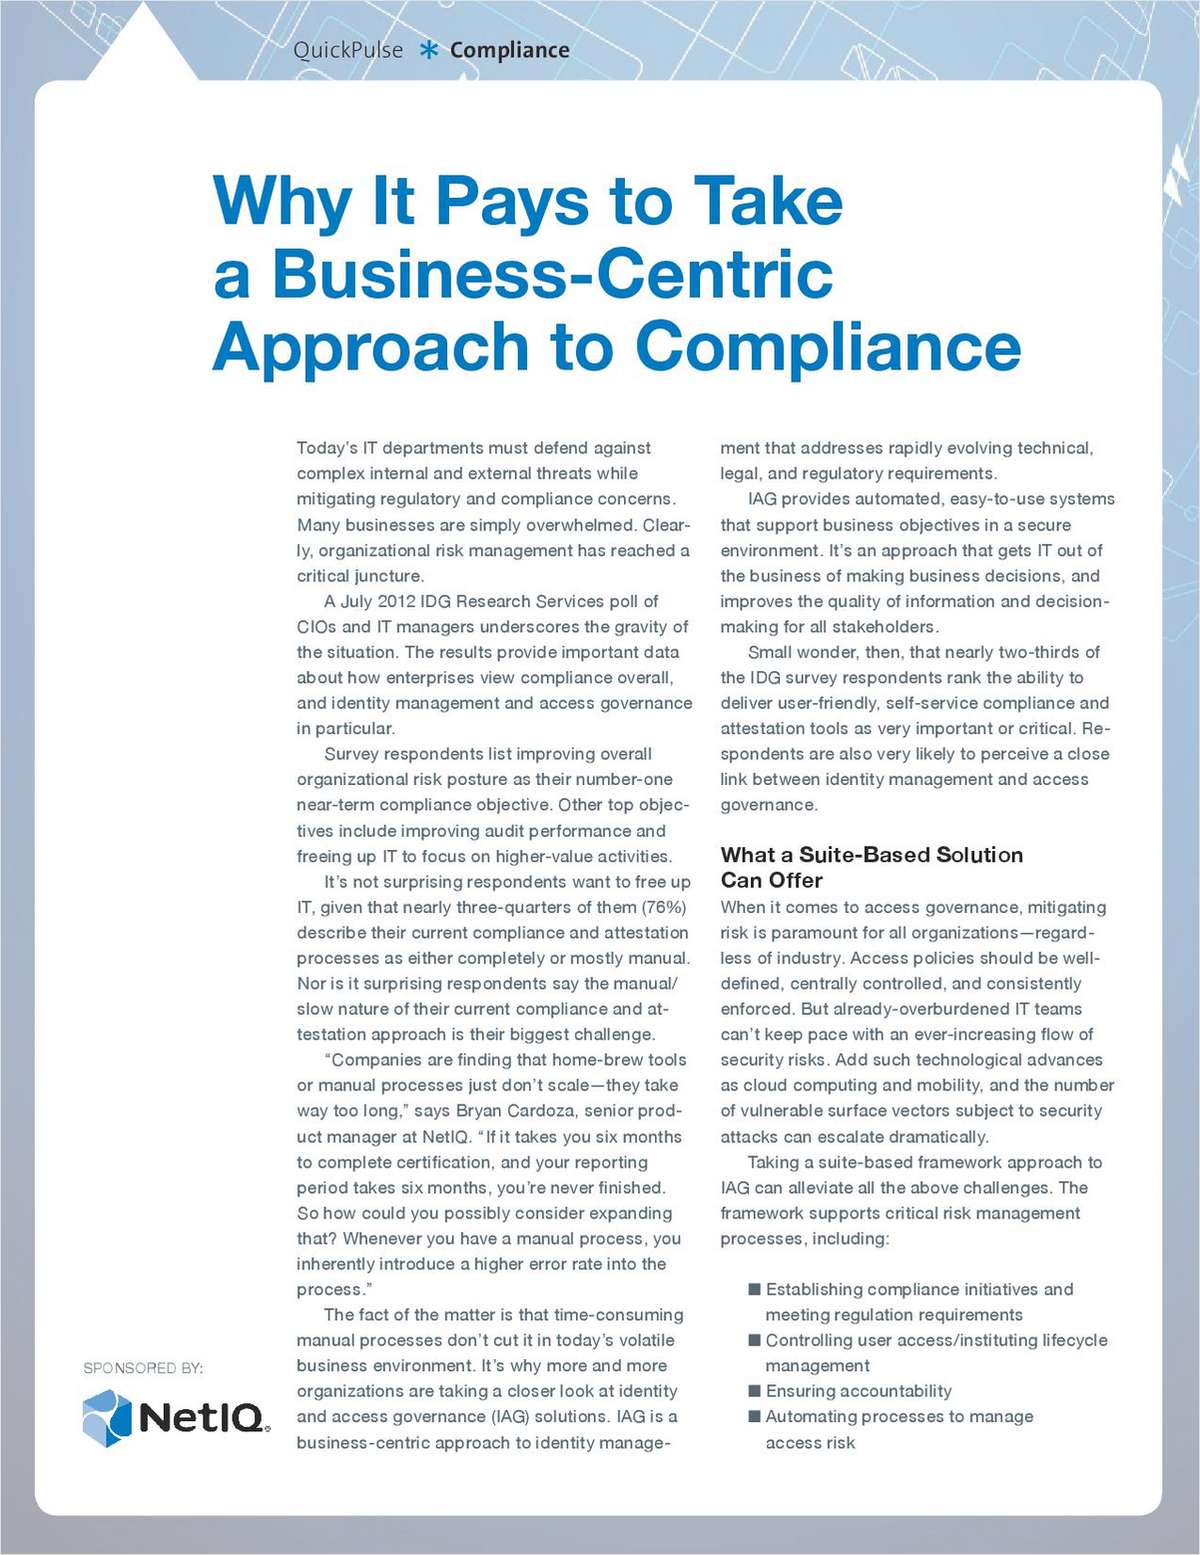 Why It Pays to Take a Business-Centric Approach to Compliance